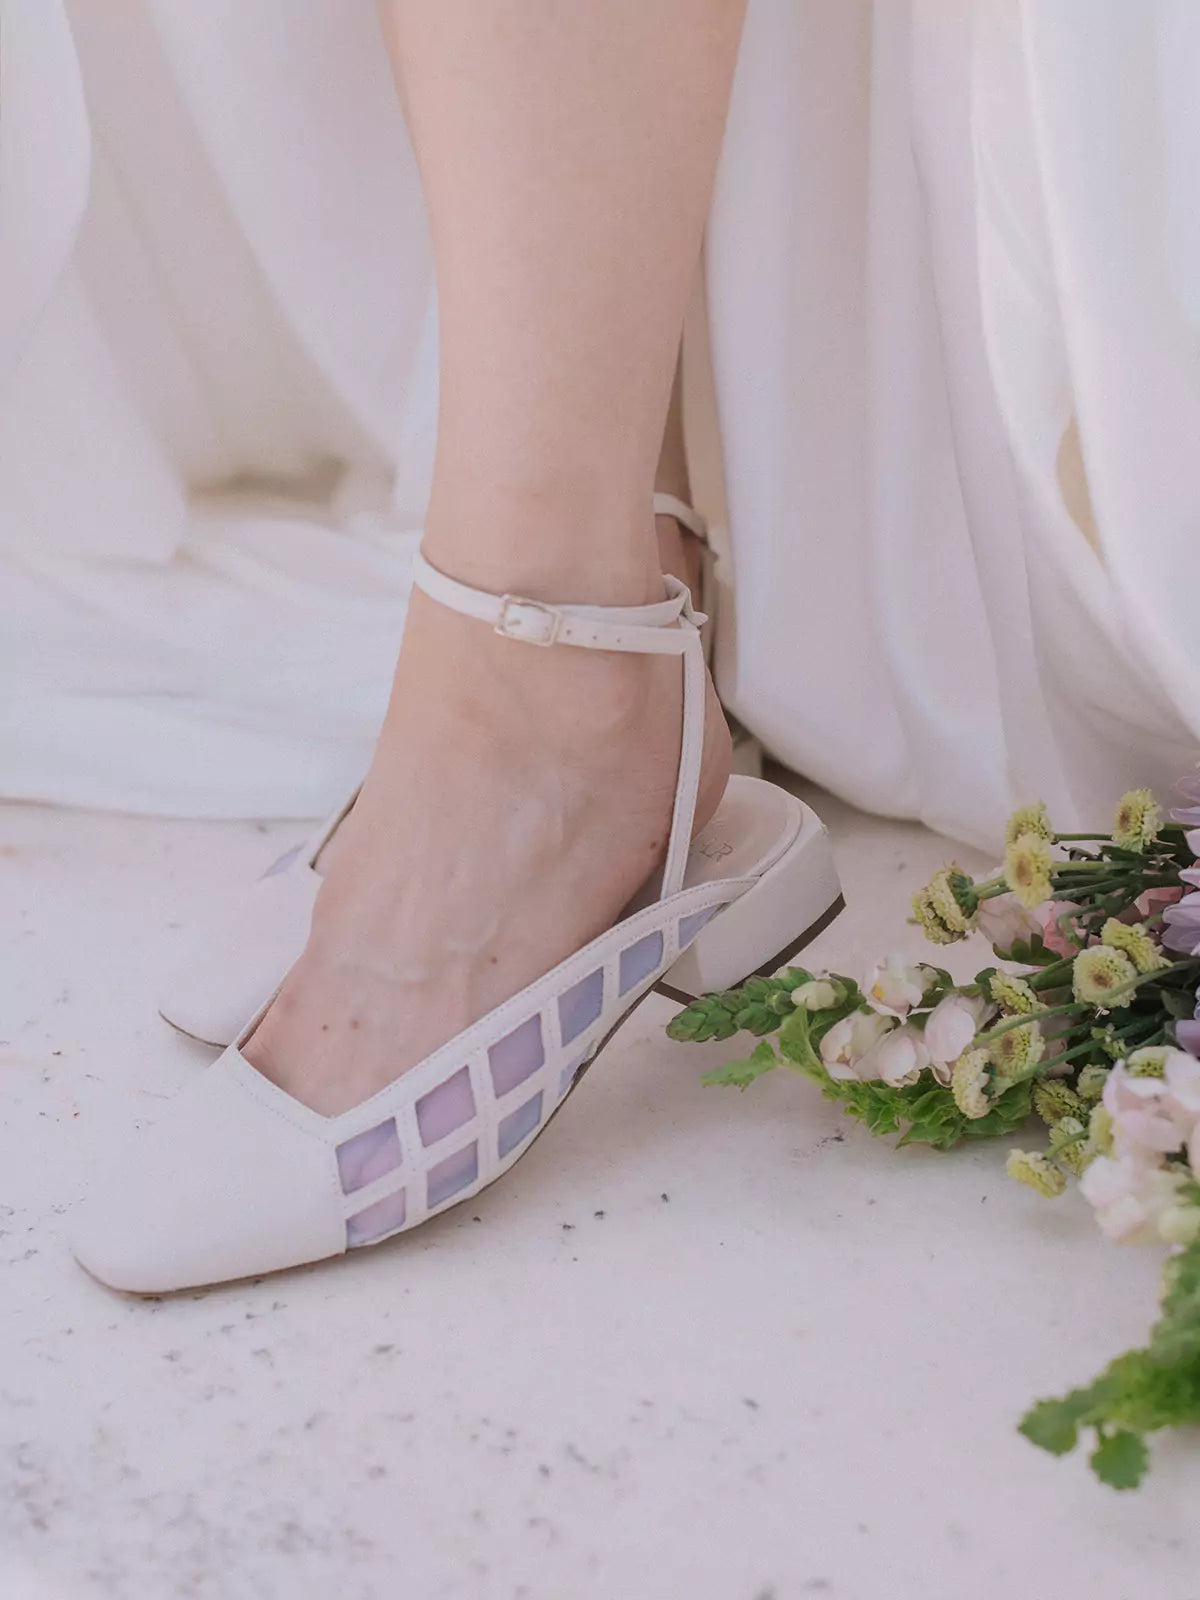 The Best Wedding Heels - E'mar Made in Italy